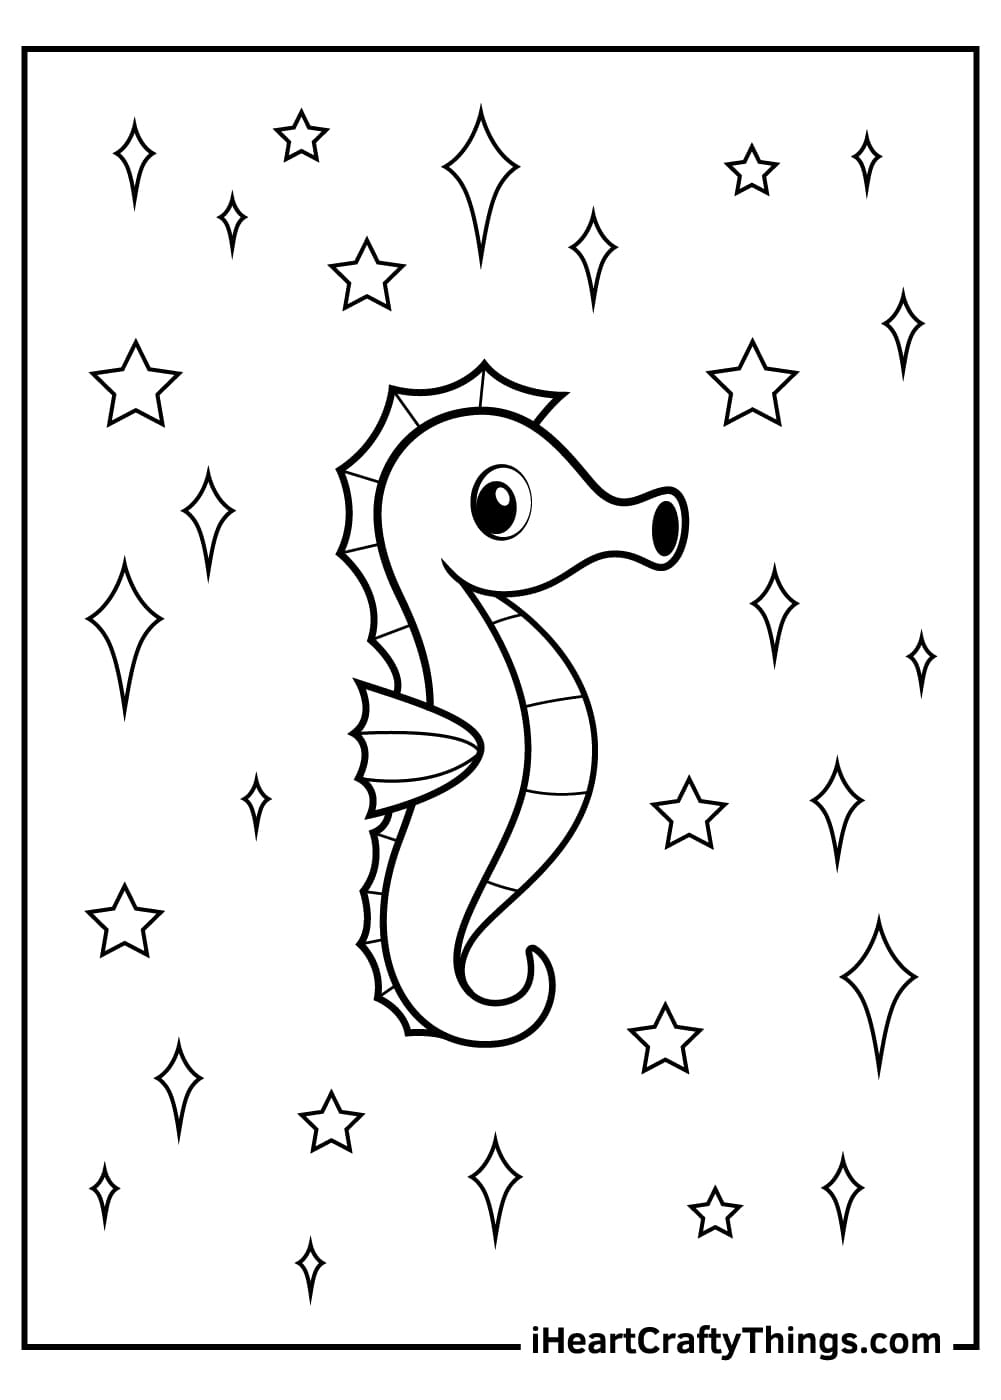 Ball Icon Black Image Children Coloring Page